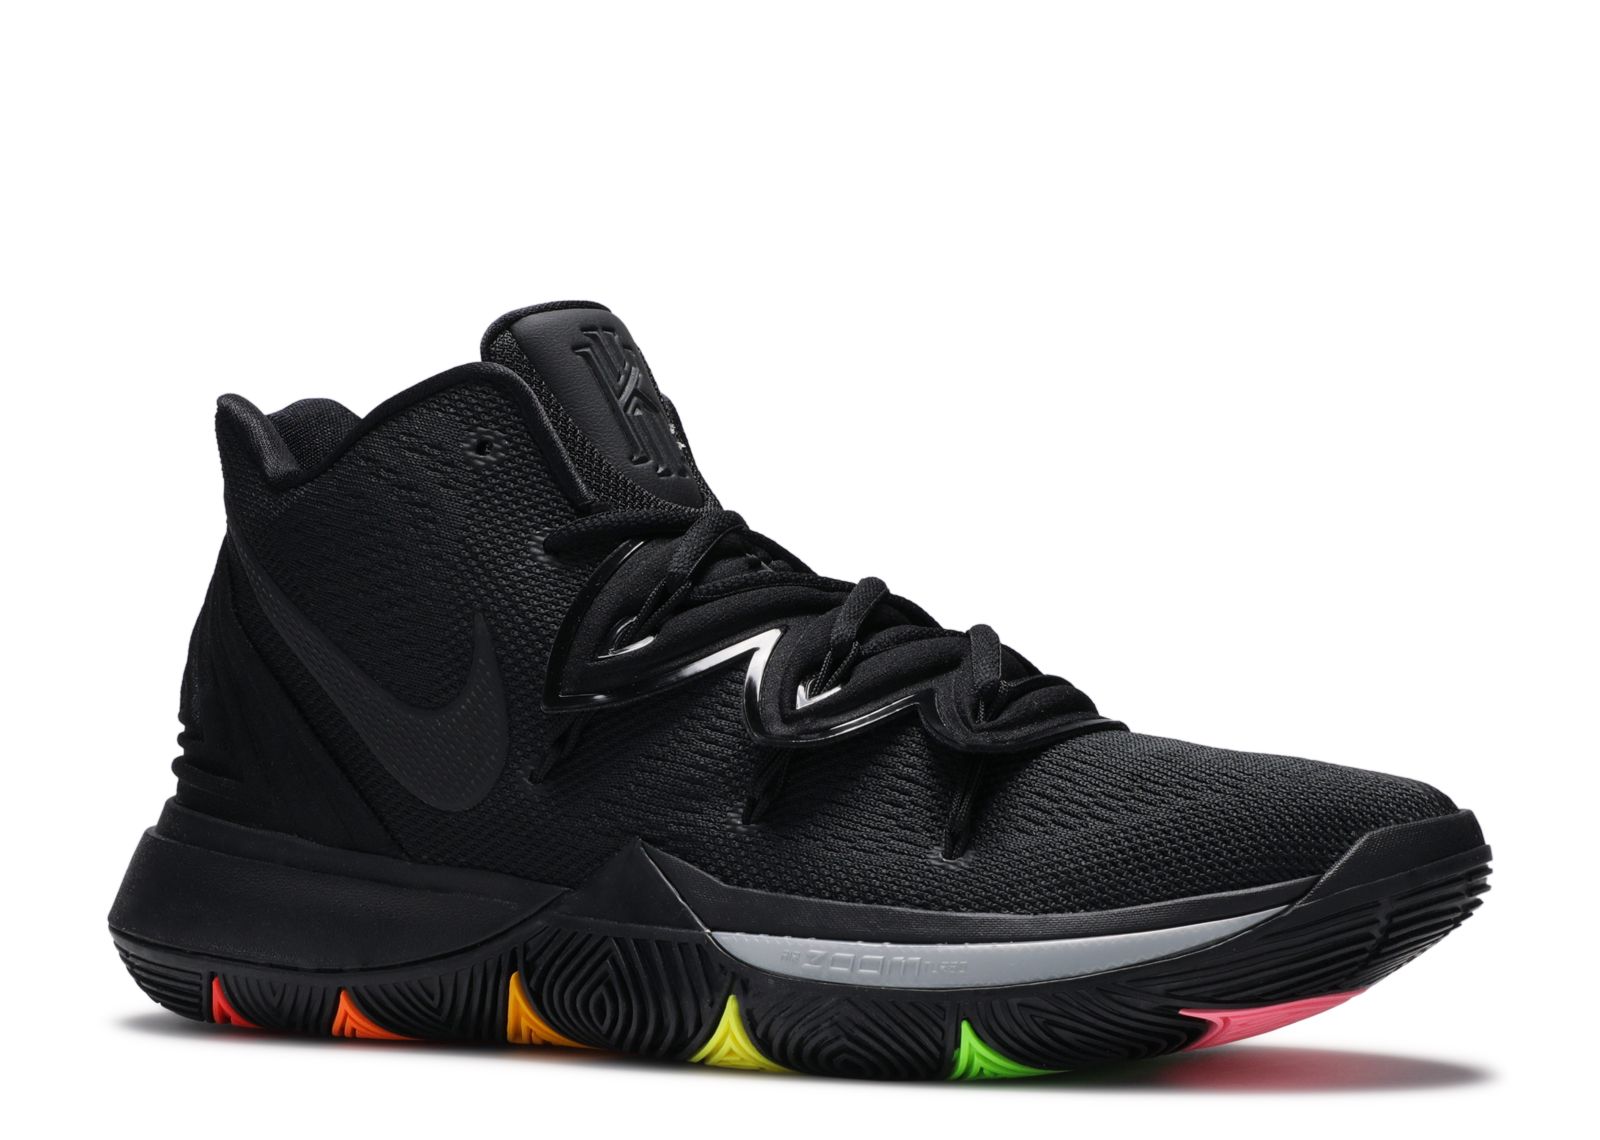 kyrie 5 pictures